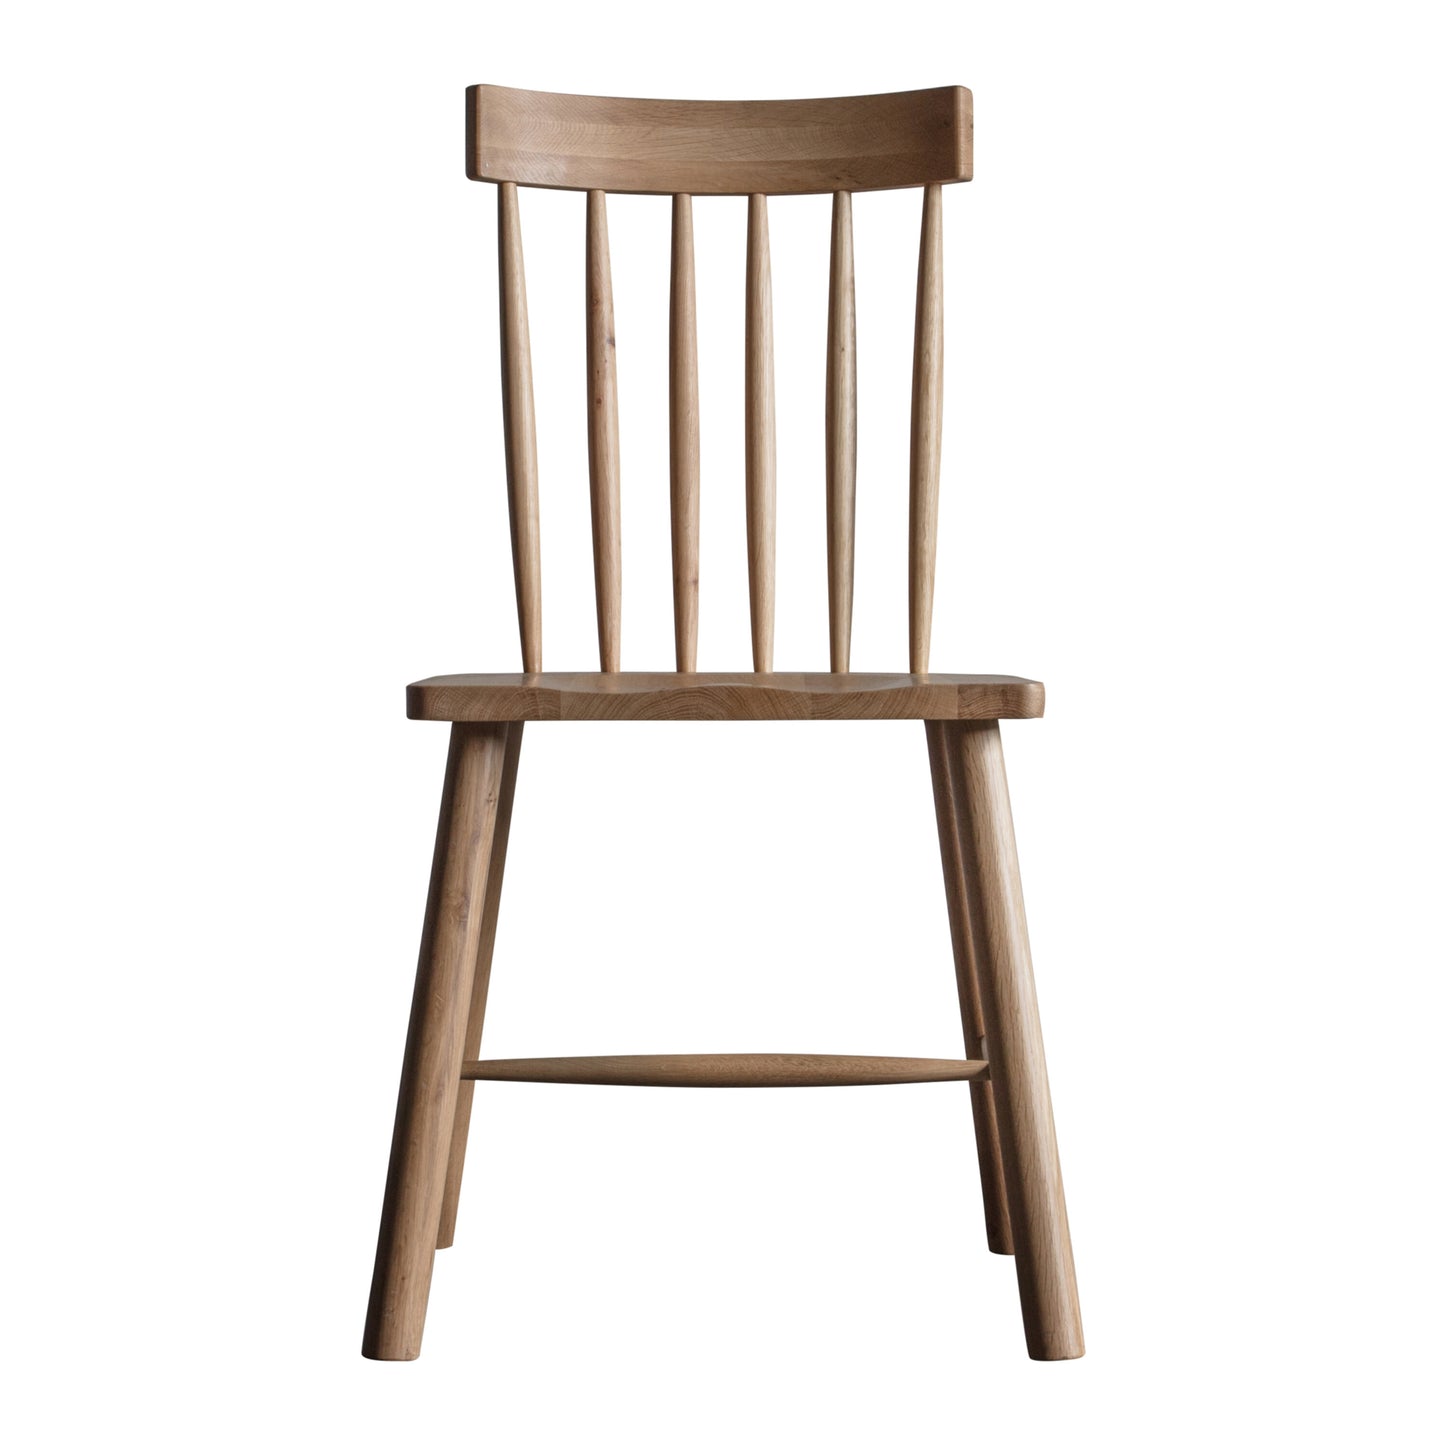 Colton Oak Dining Chair (2 Pack)